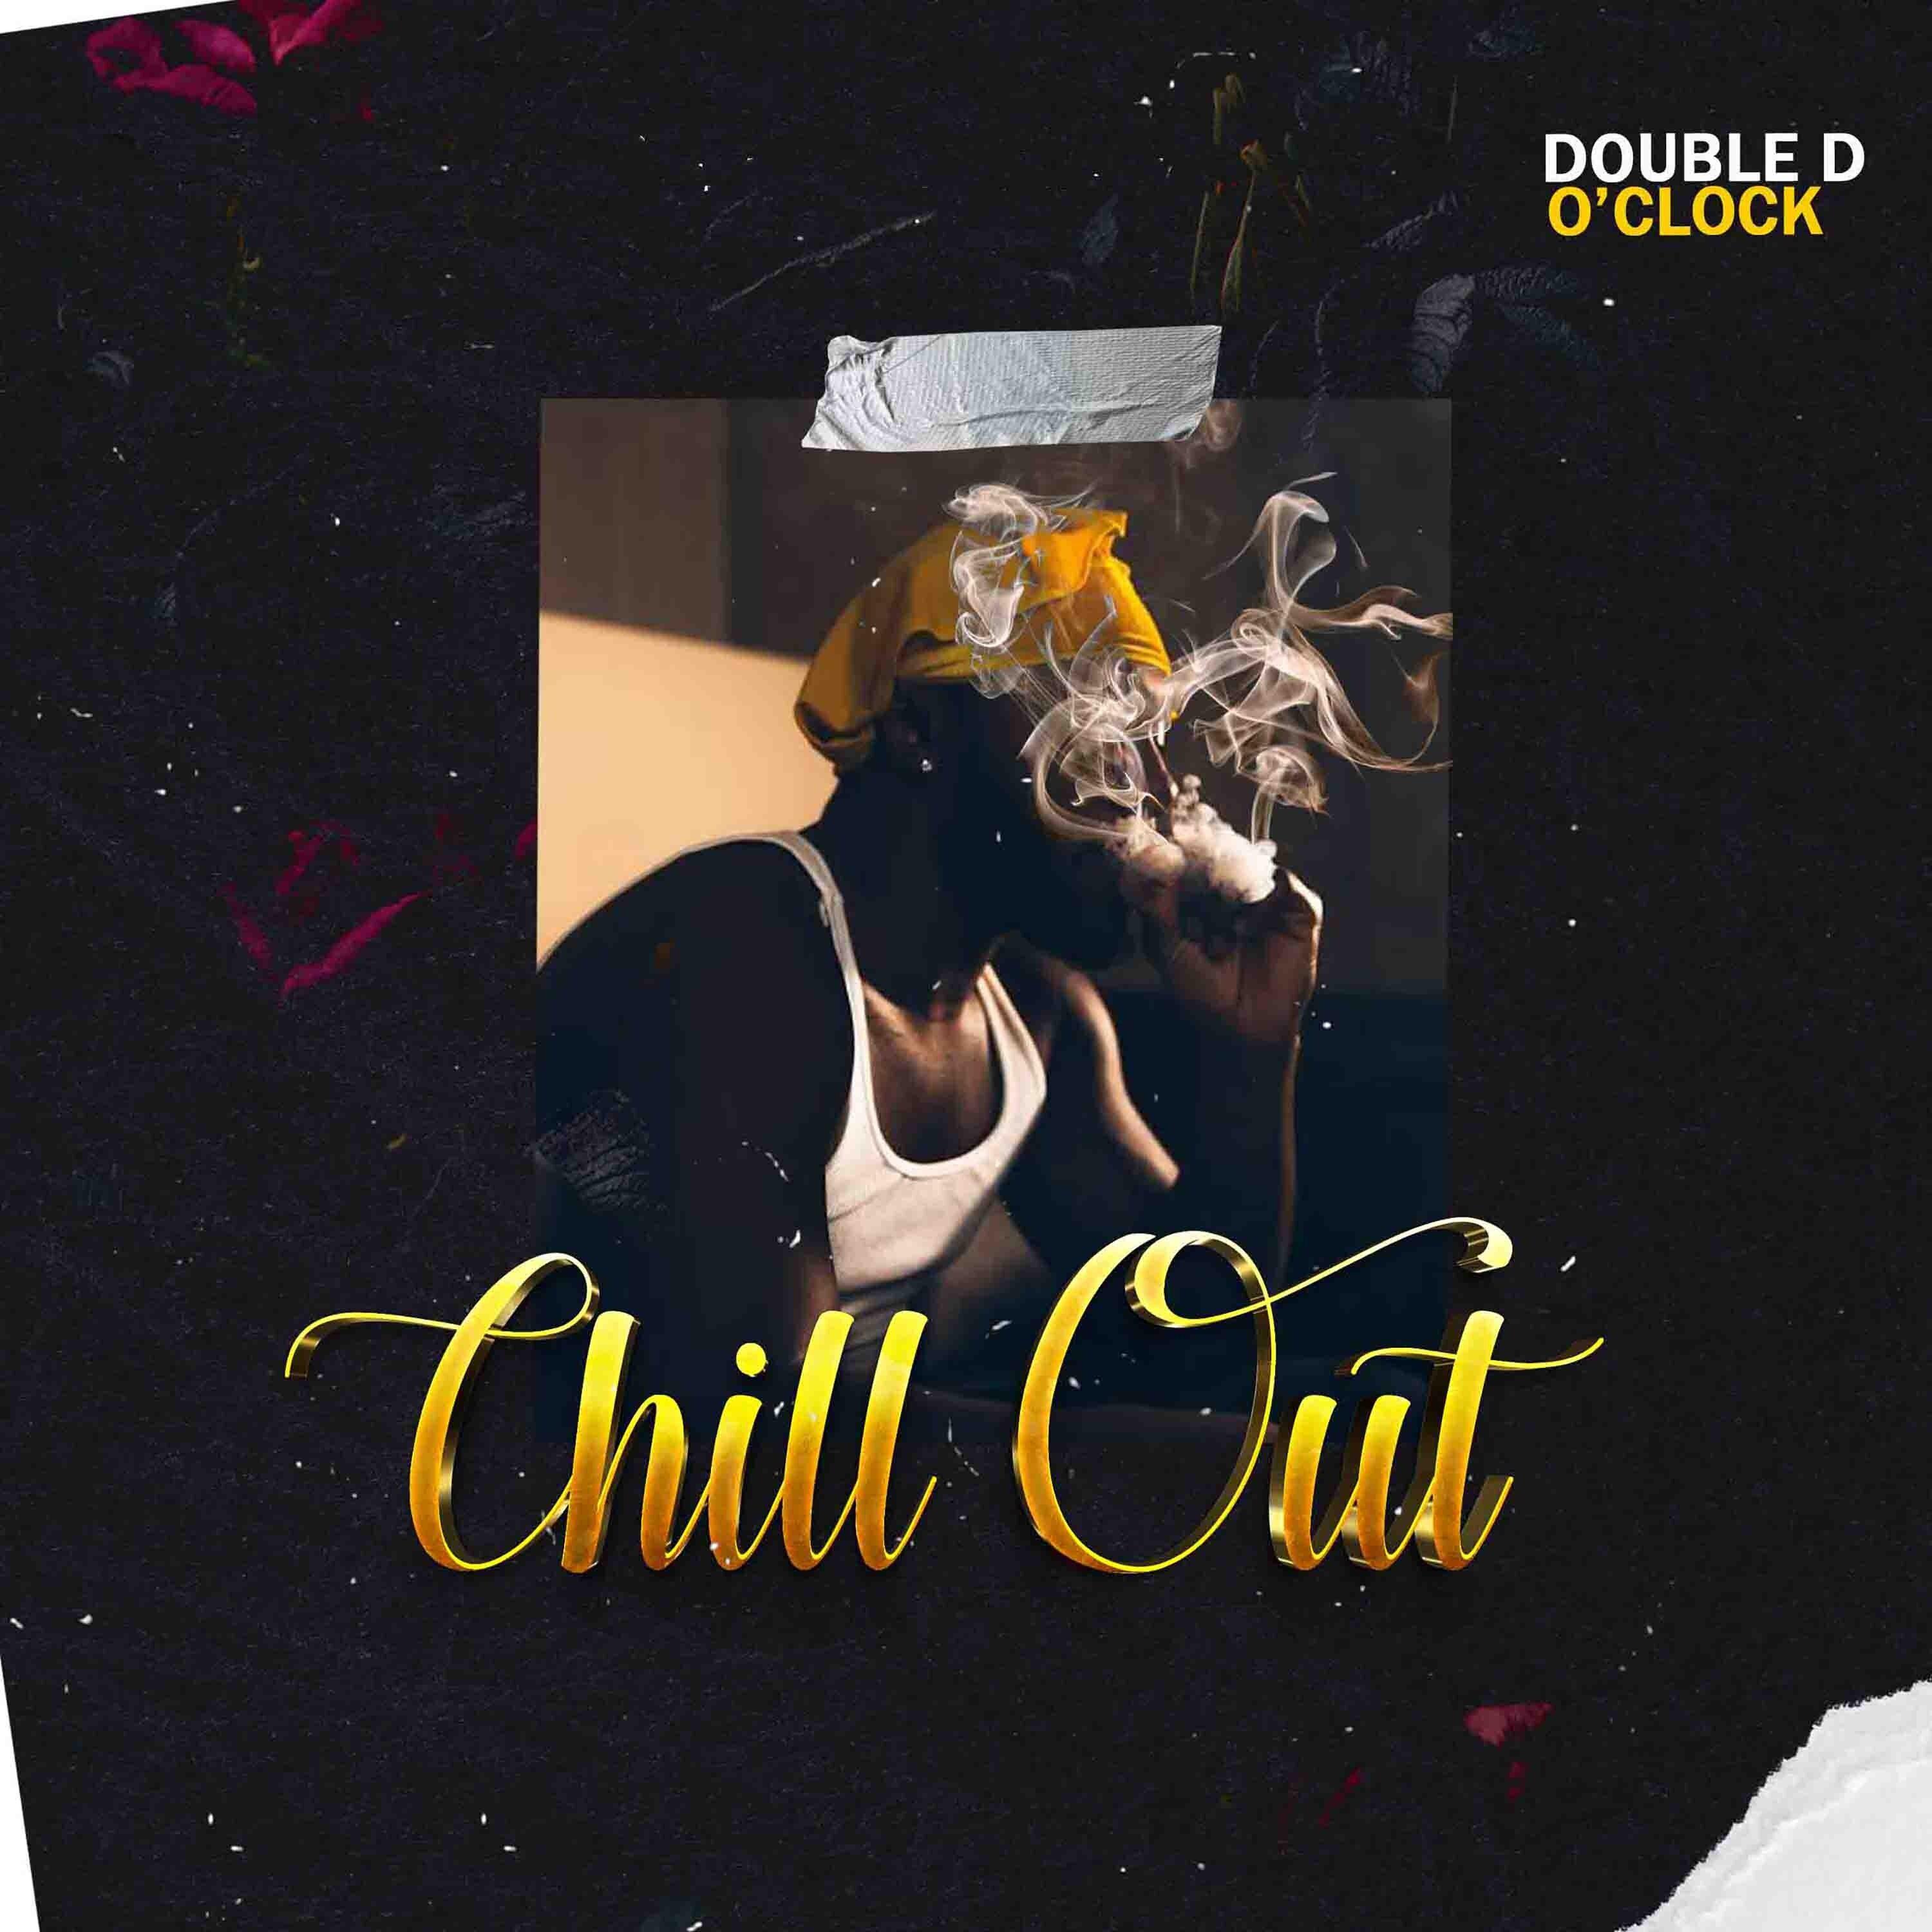 DOuble D O'clock - Chill Out